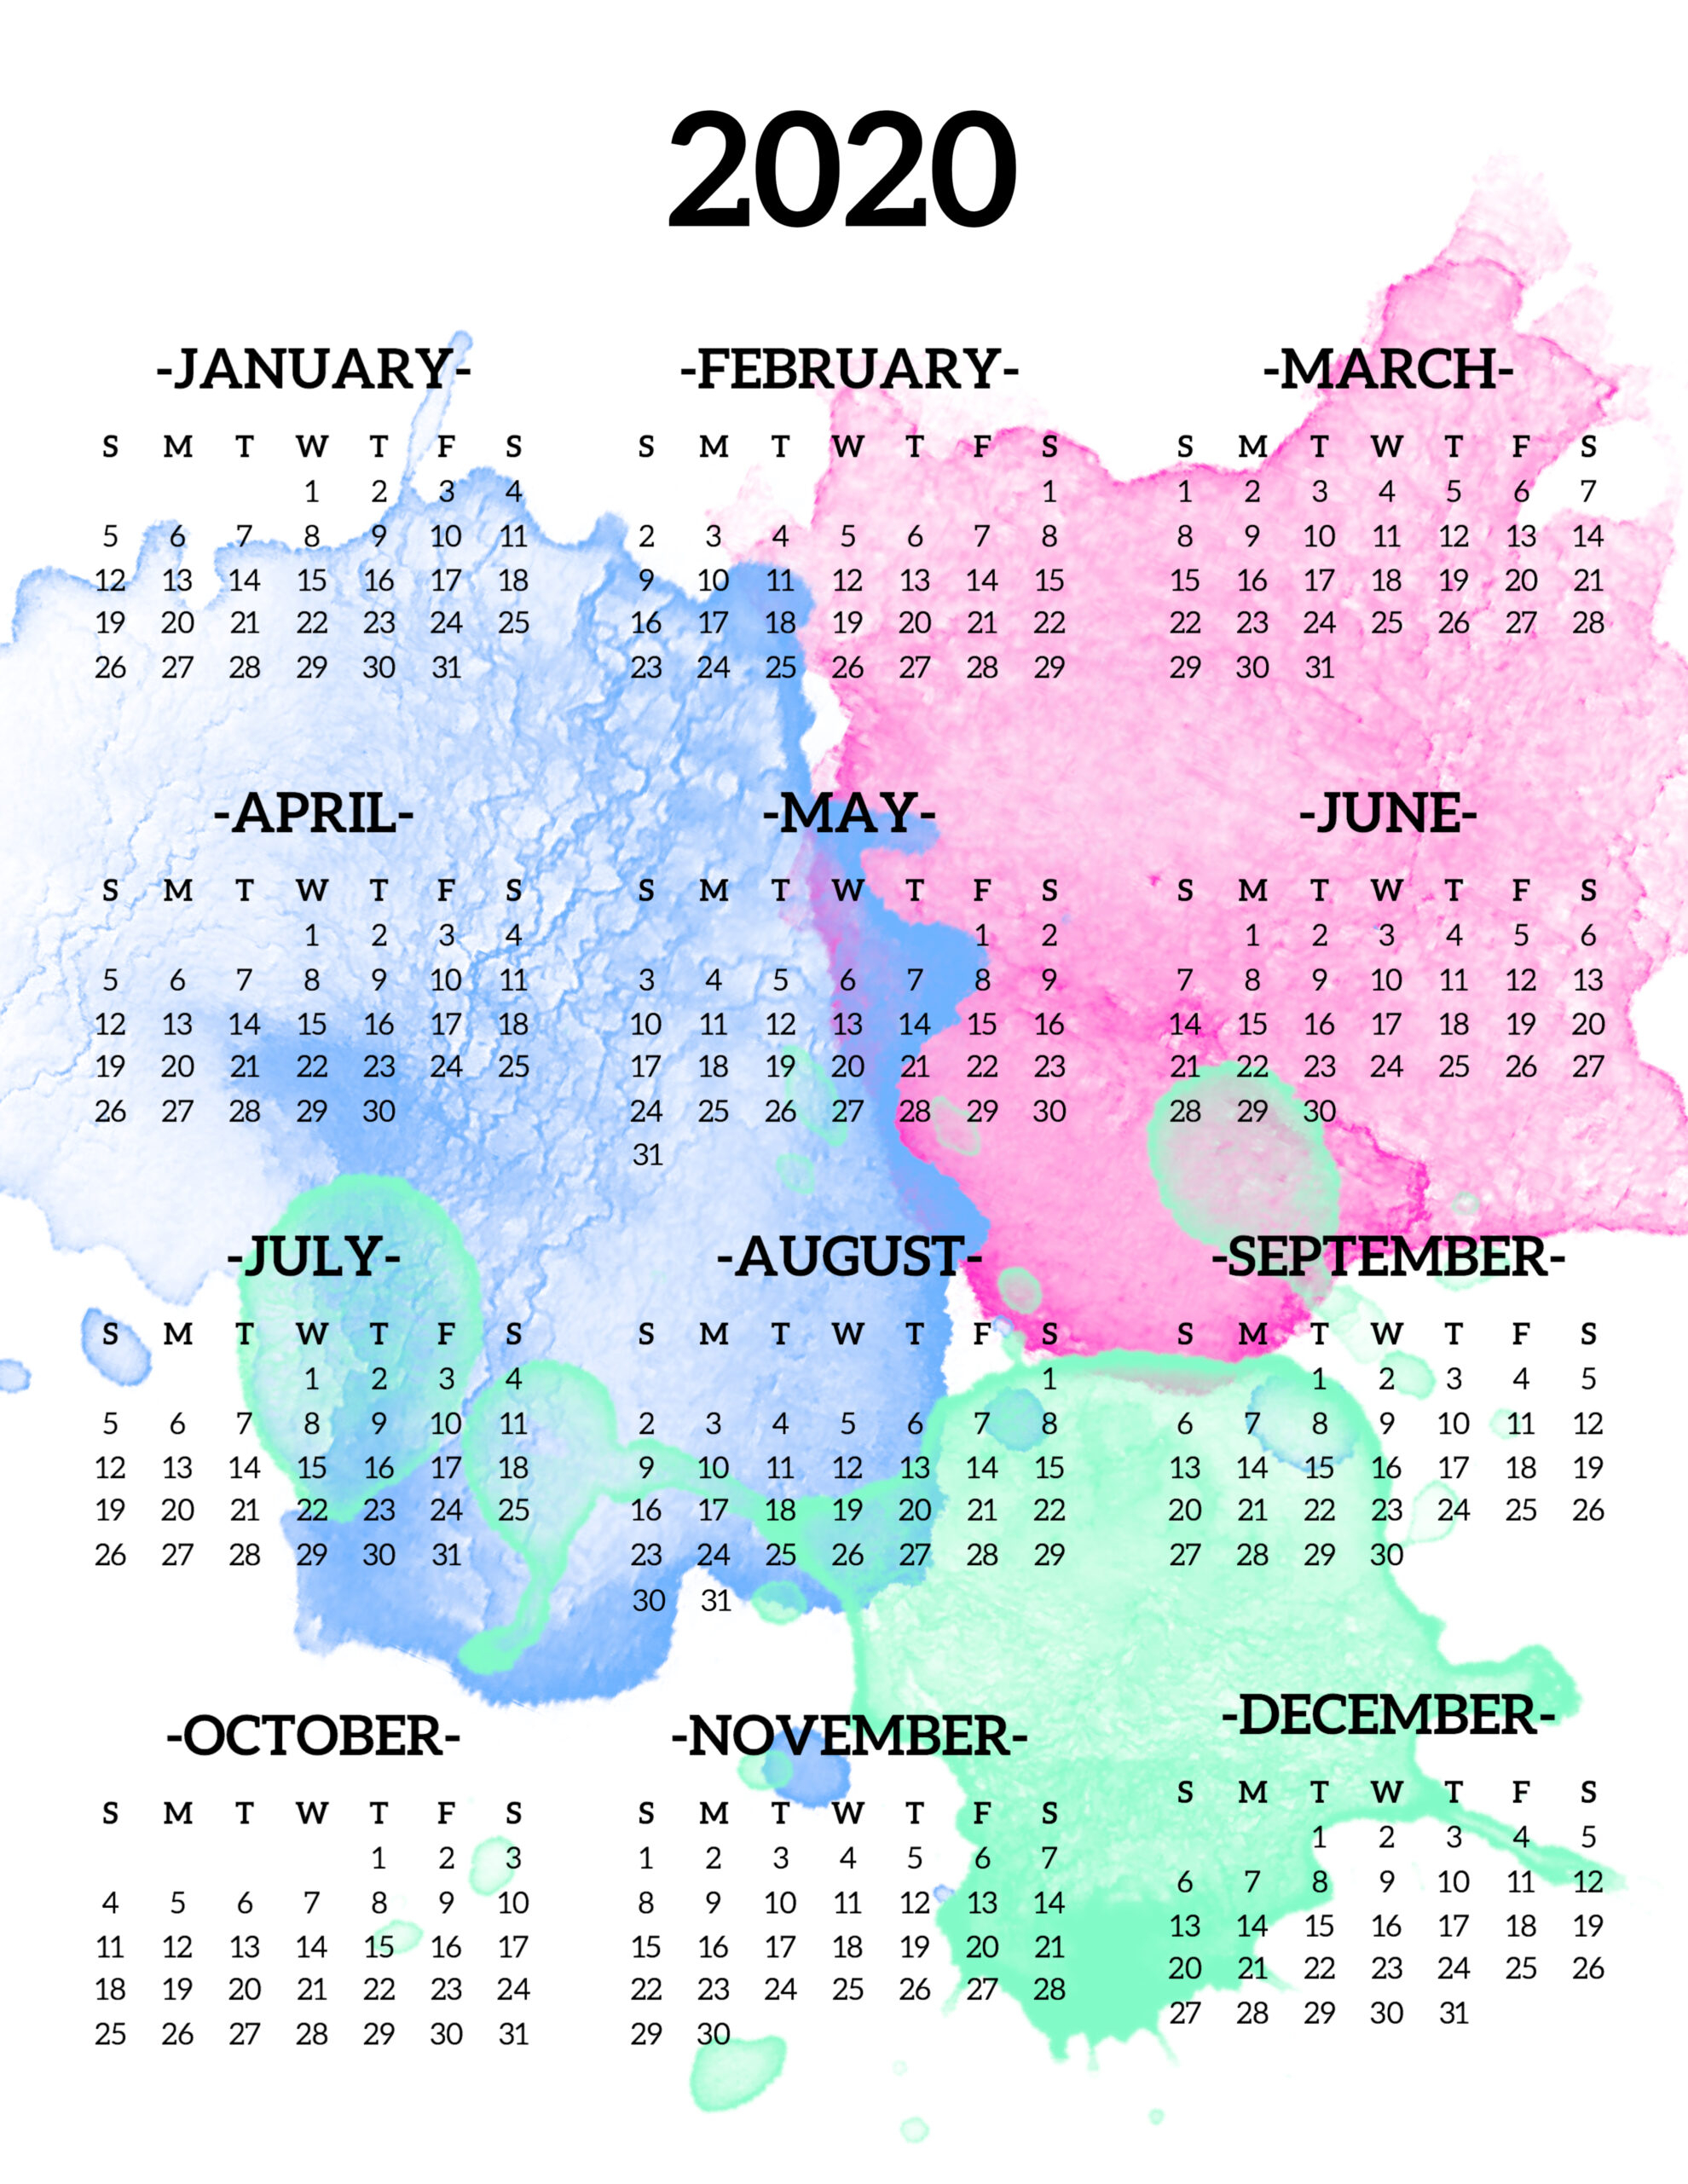 Calendar 2020 Printable One Page - Paper Trail Design